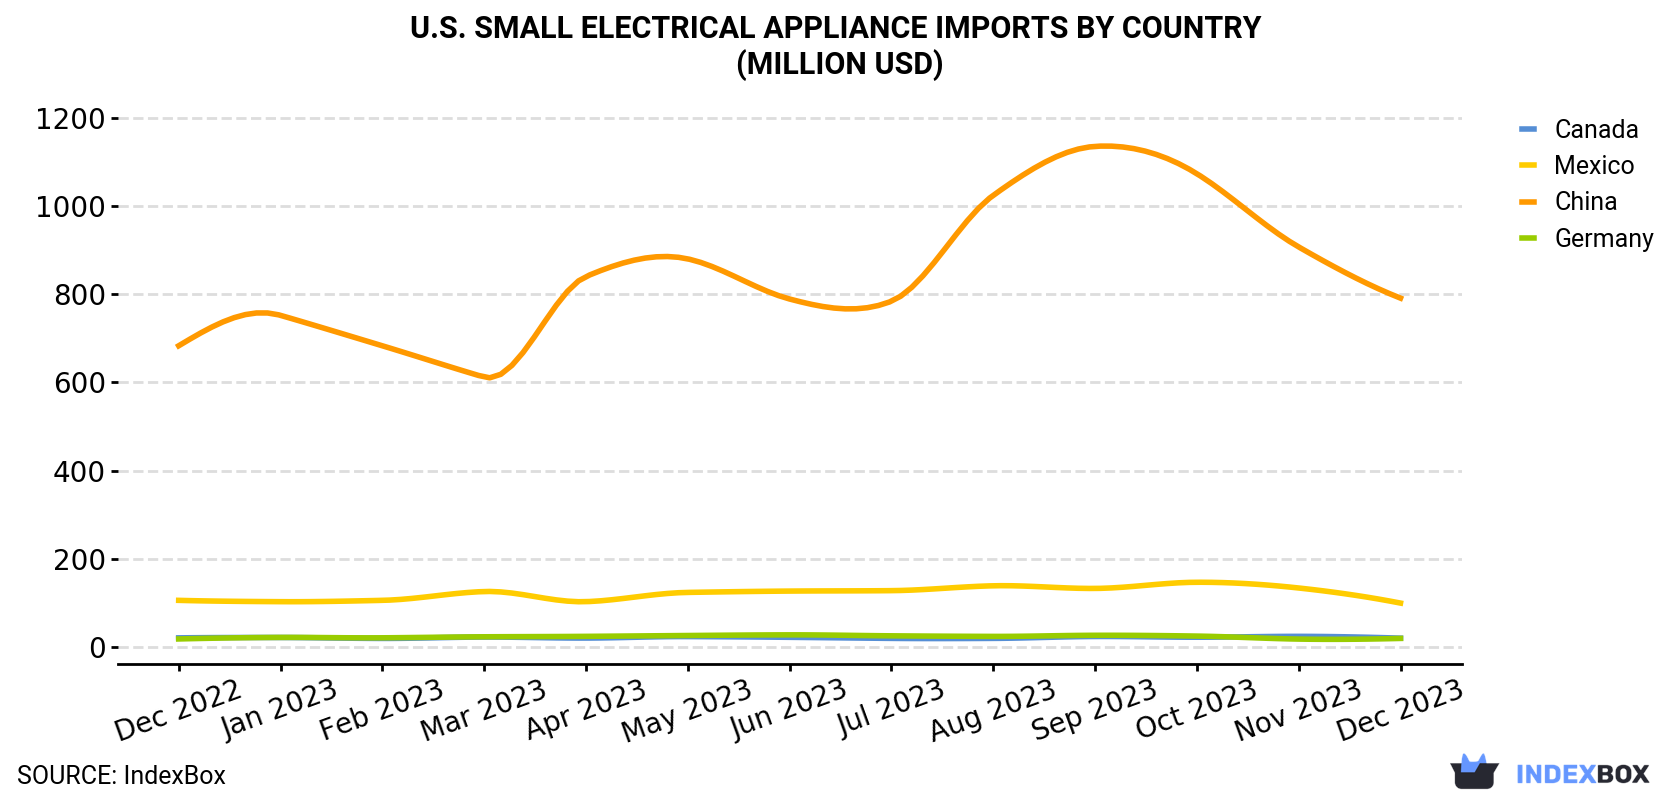 U.S. Small Electrical Appliance Imports By Country (Million USD)